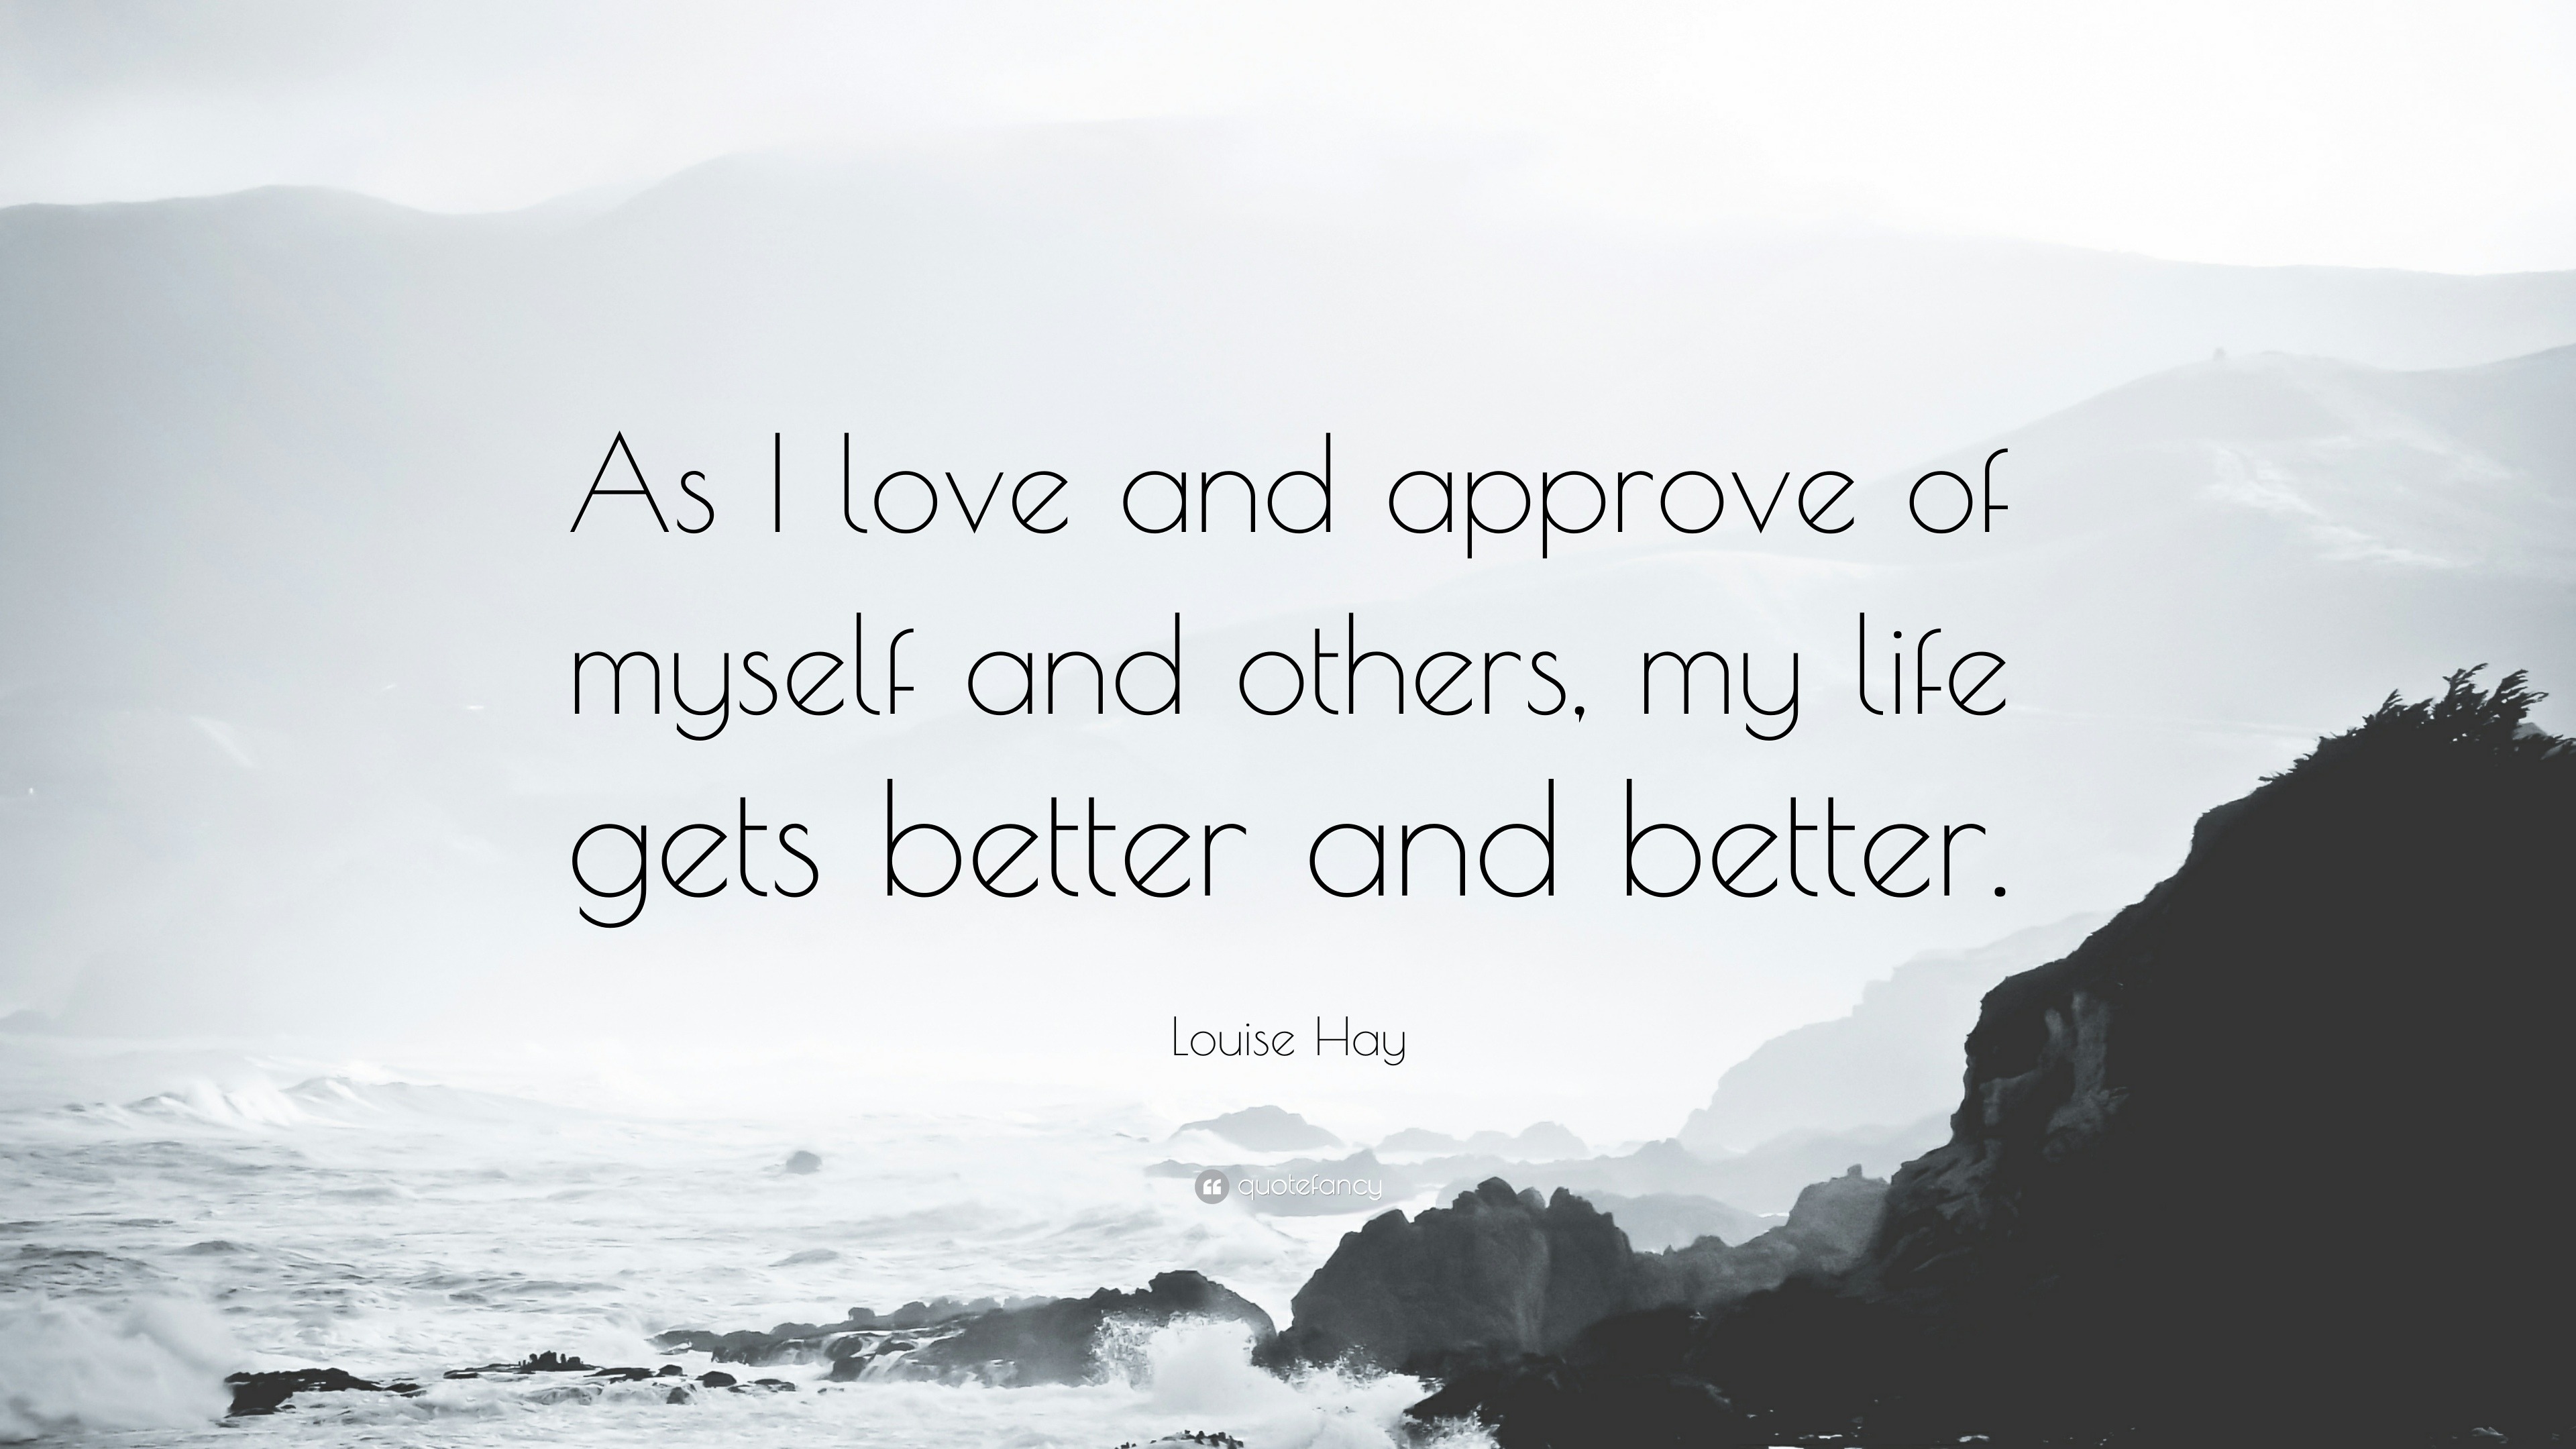 Louise Hay Quote “As I love and approve of myself and others my